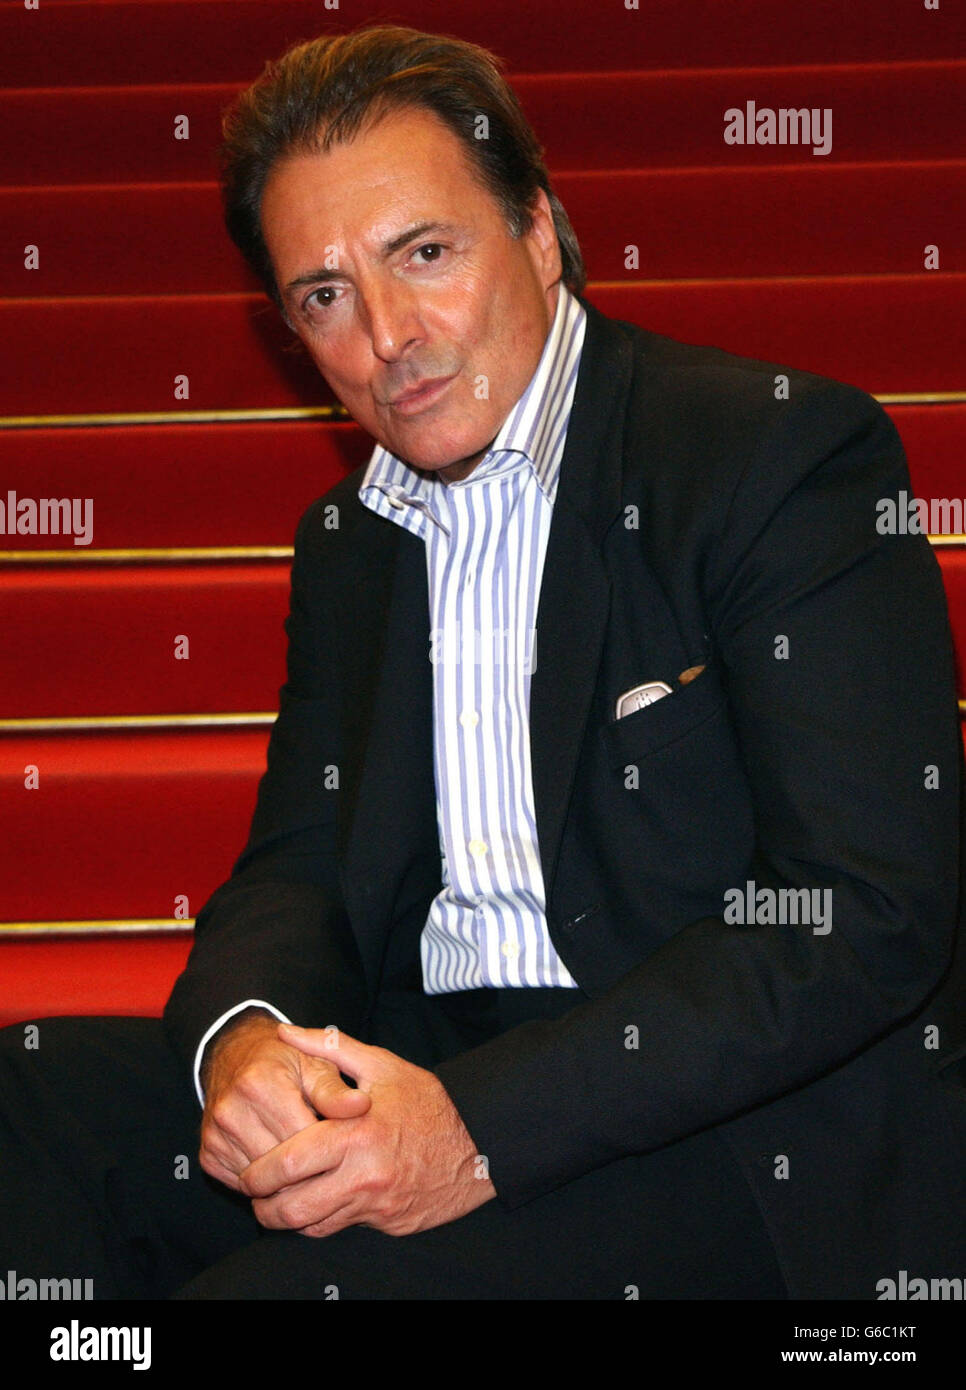 Actor Armand Assante arrives at the Palais de Festival for the Premiere of his film 'Citizen Verdict' during the 56th Cannes film Festival in Cannes, France. Stock Photo